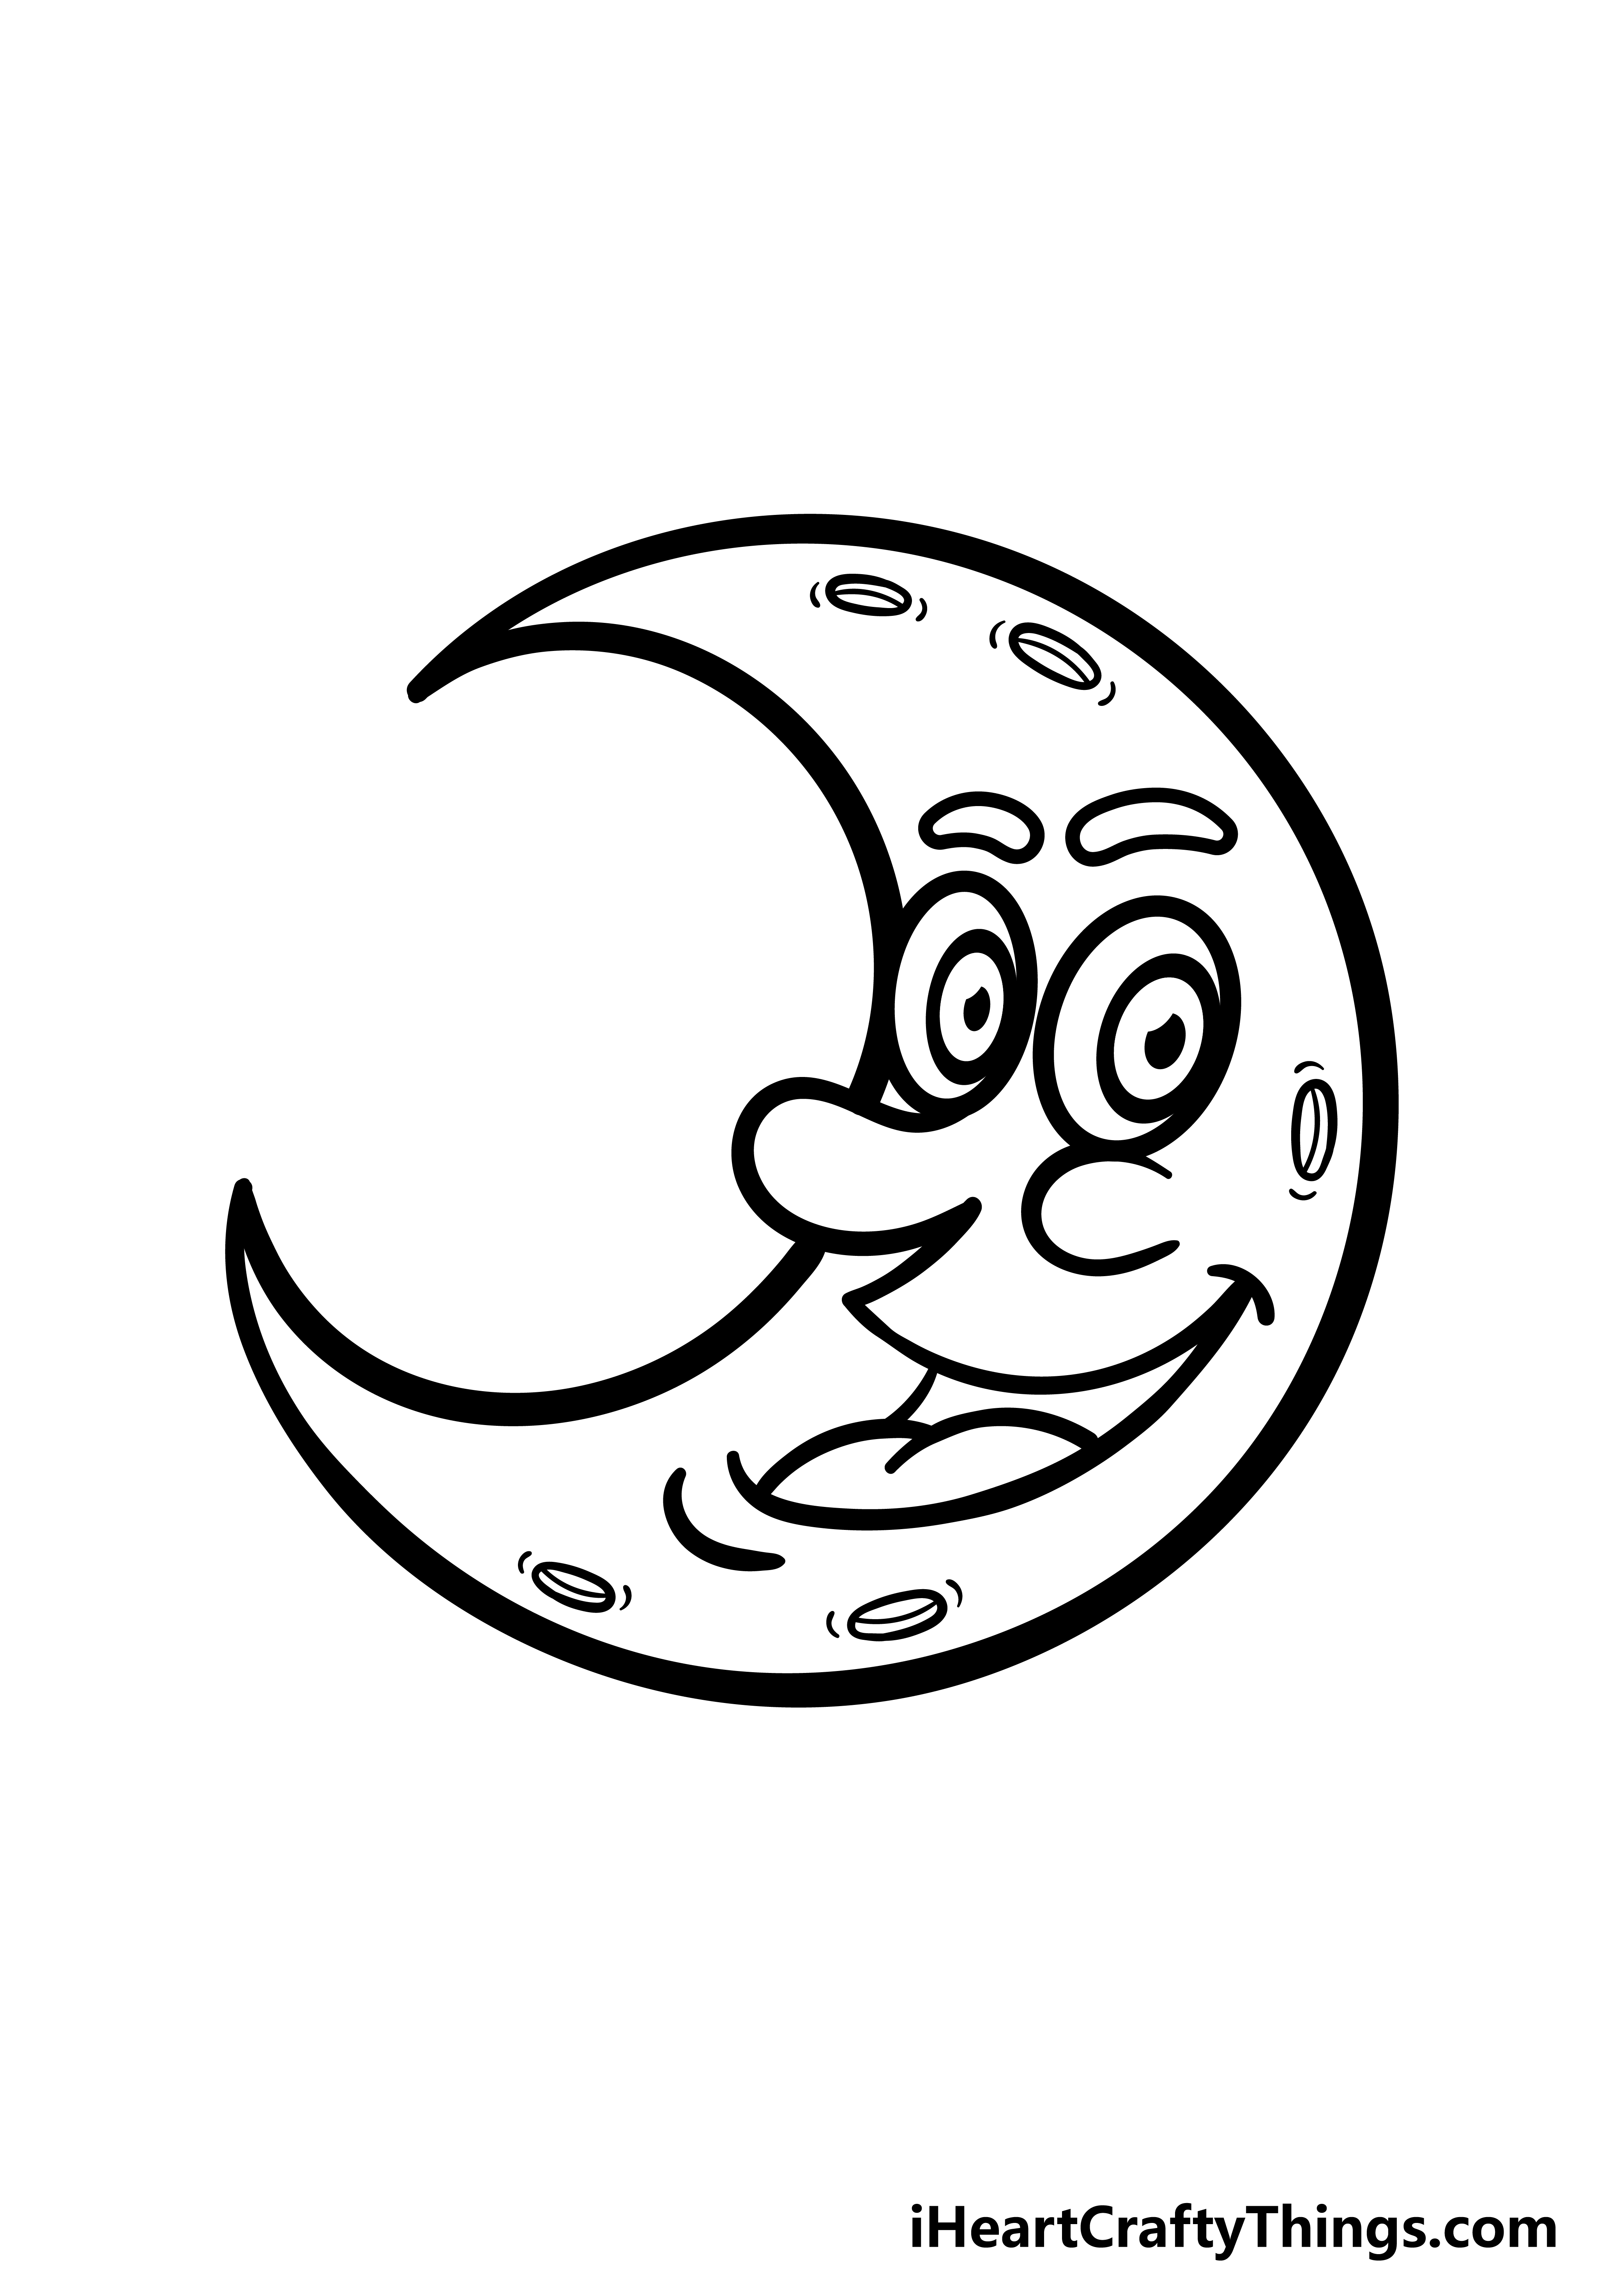 Cartoon Moon Drawing - How To Draw A Cartoon Moon Step By Step